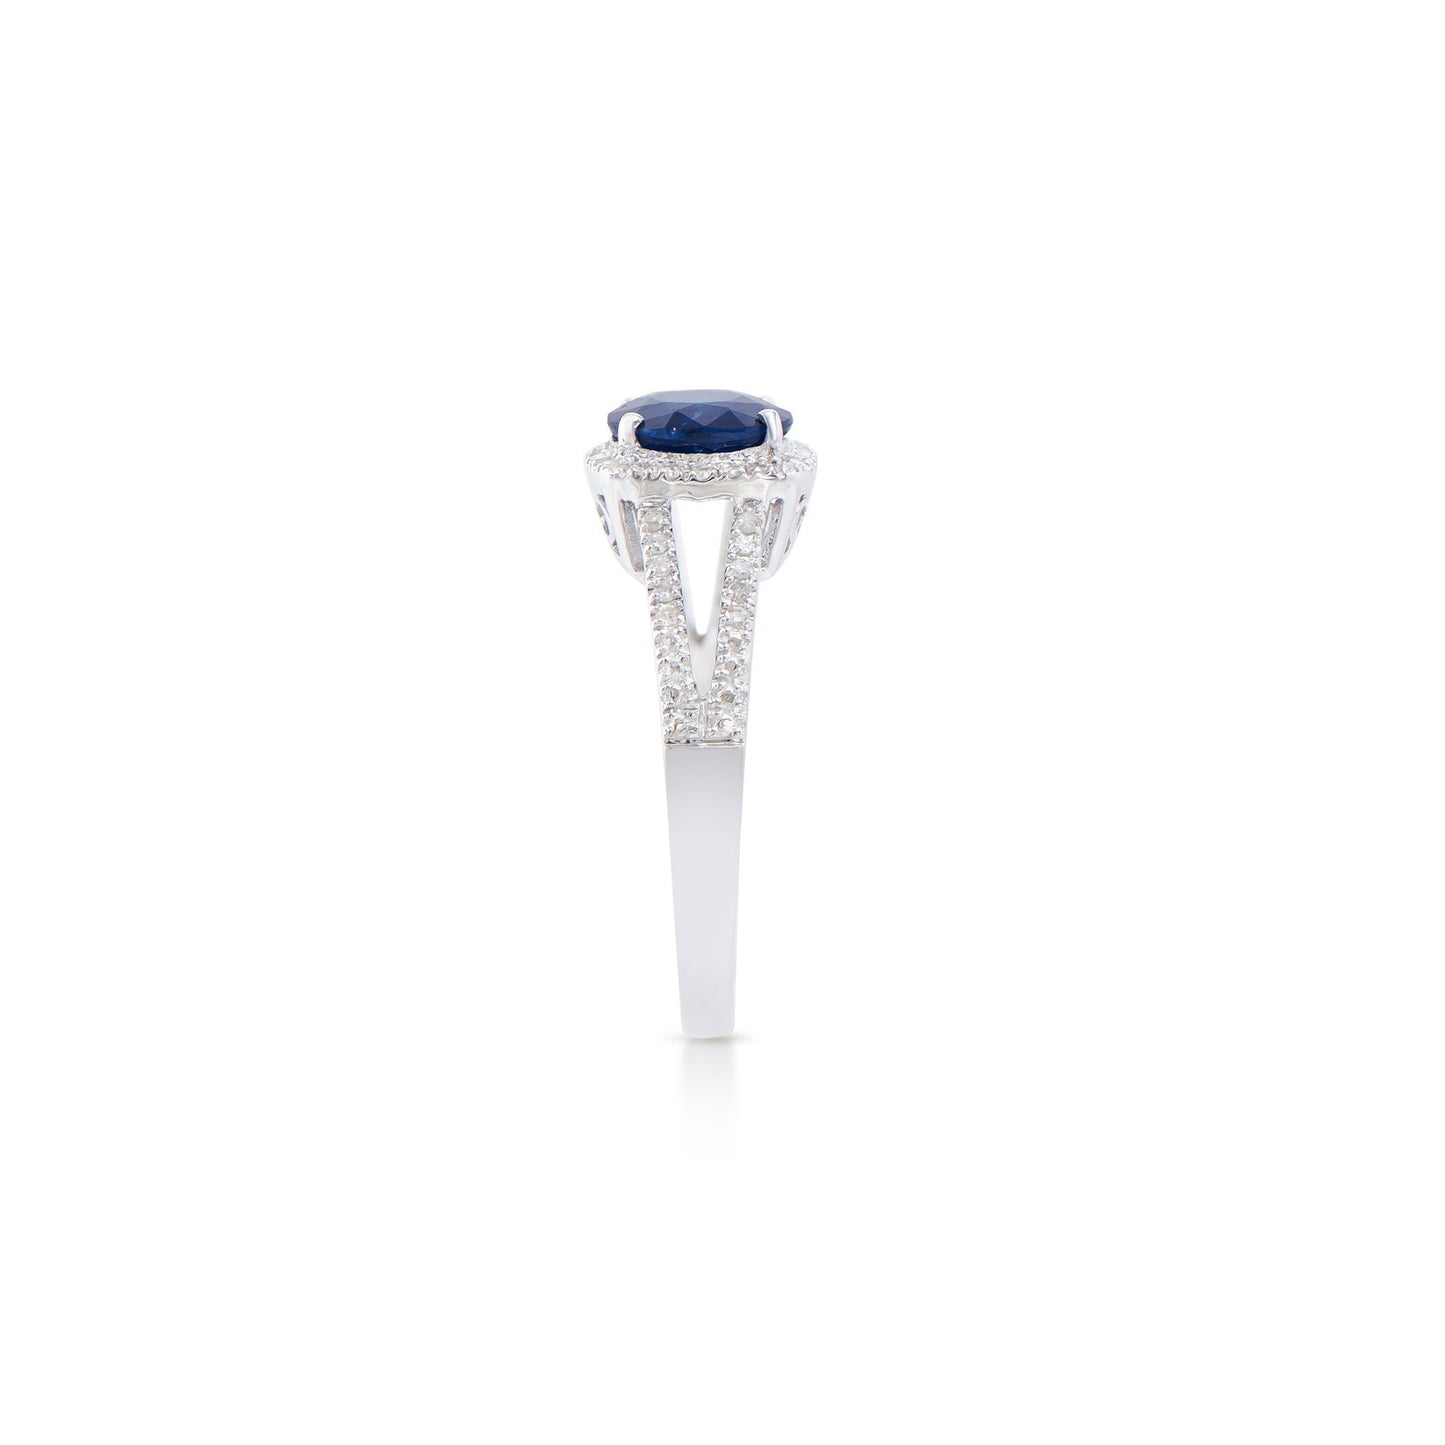 14KT White Gold 2.05ct Blue Sapphire and Diamond Ring